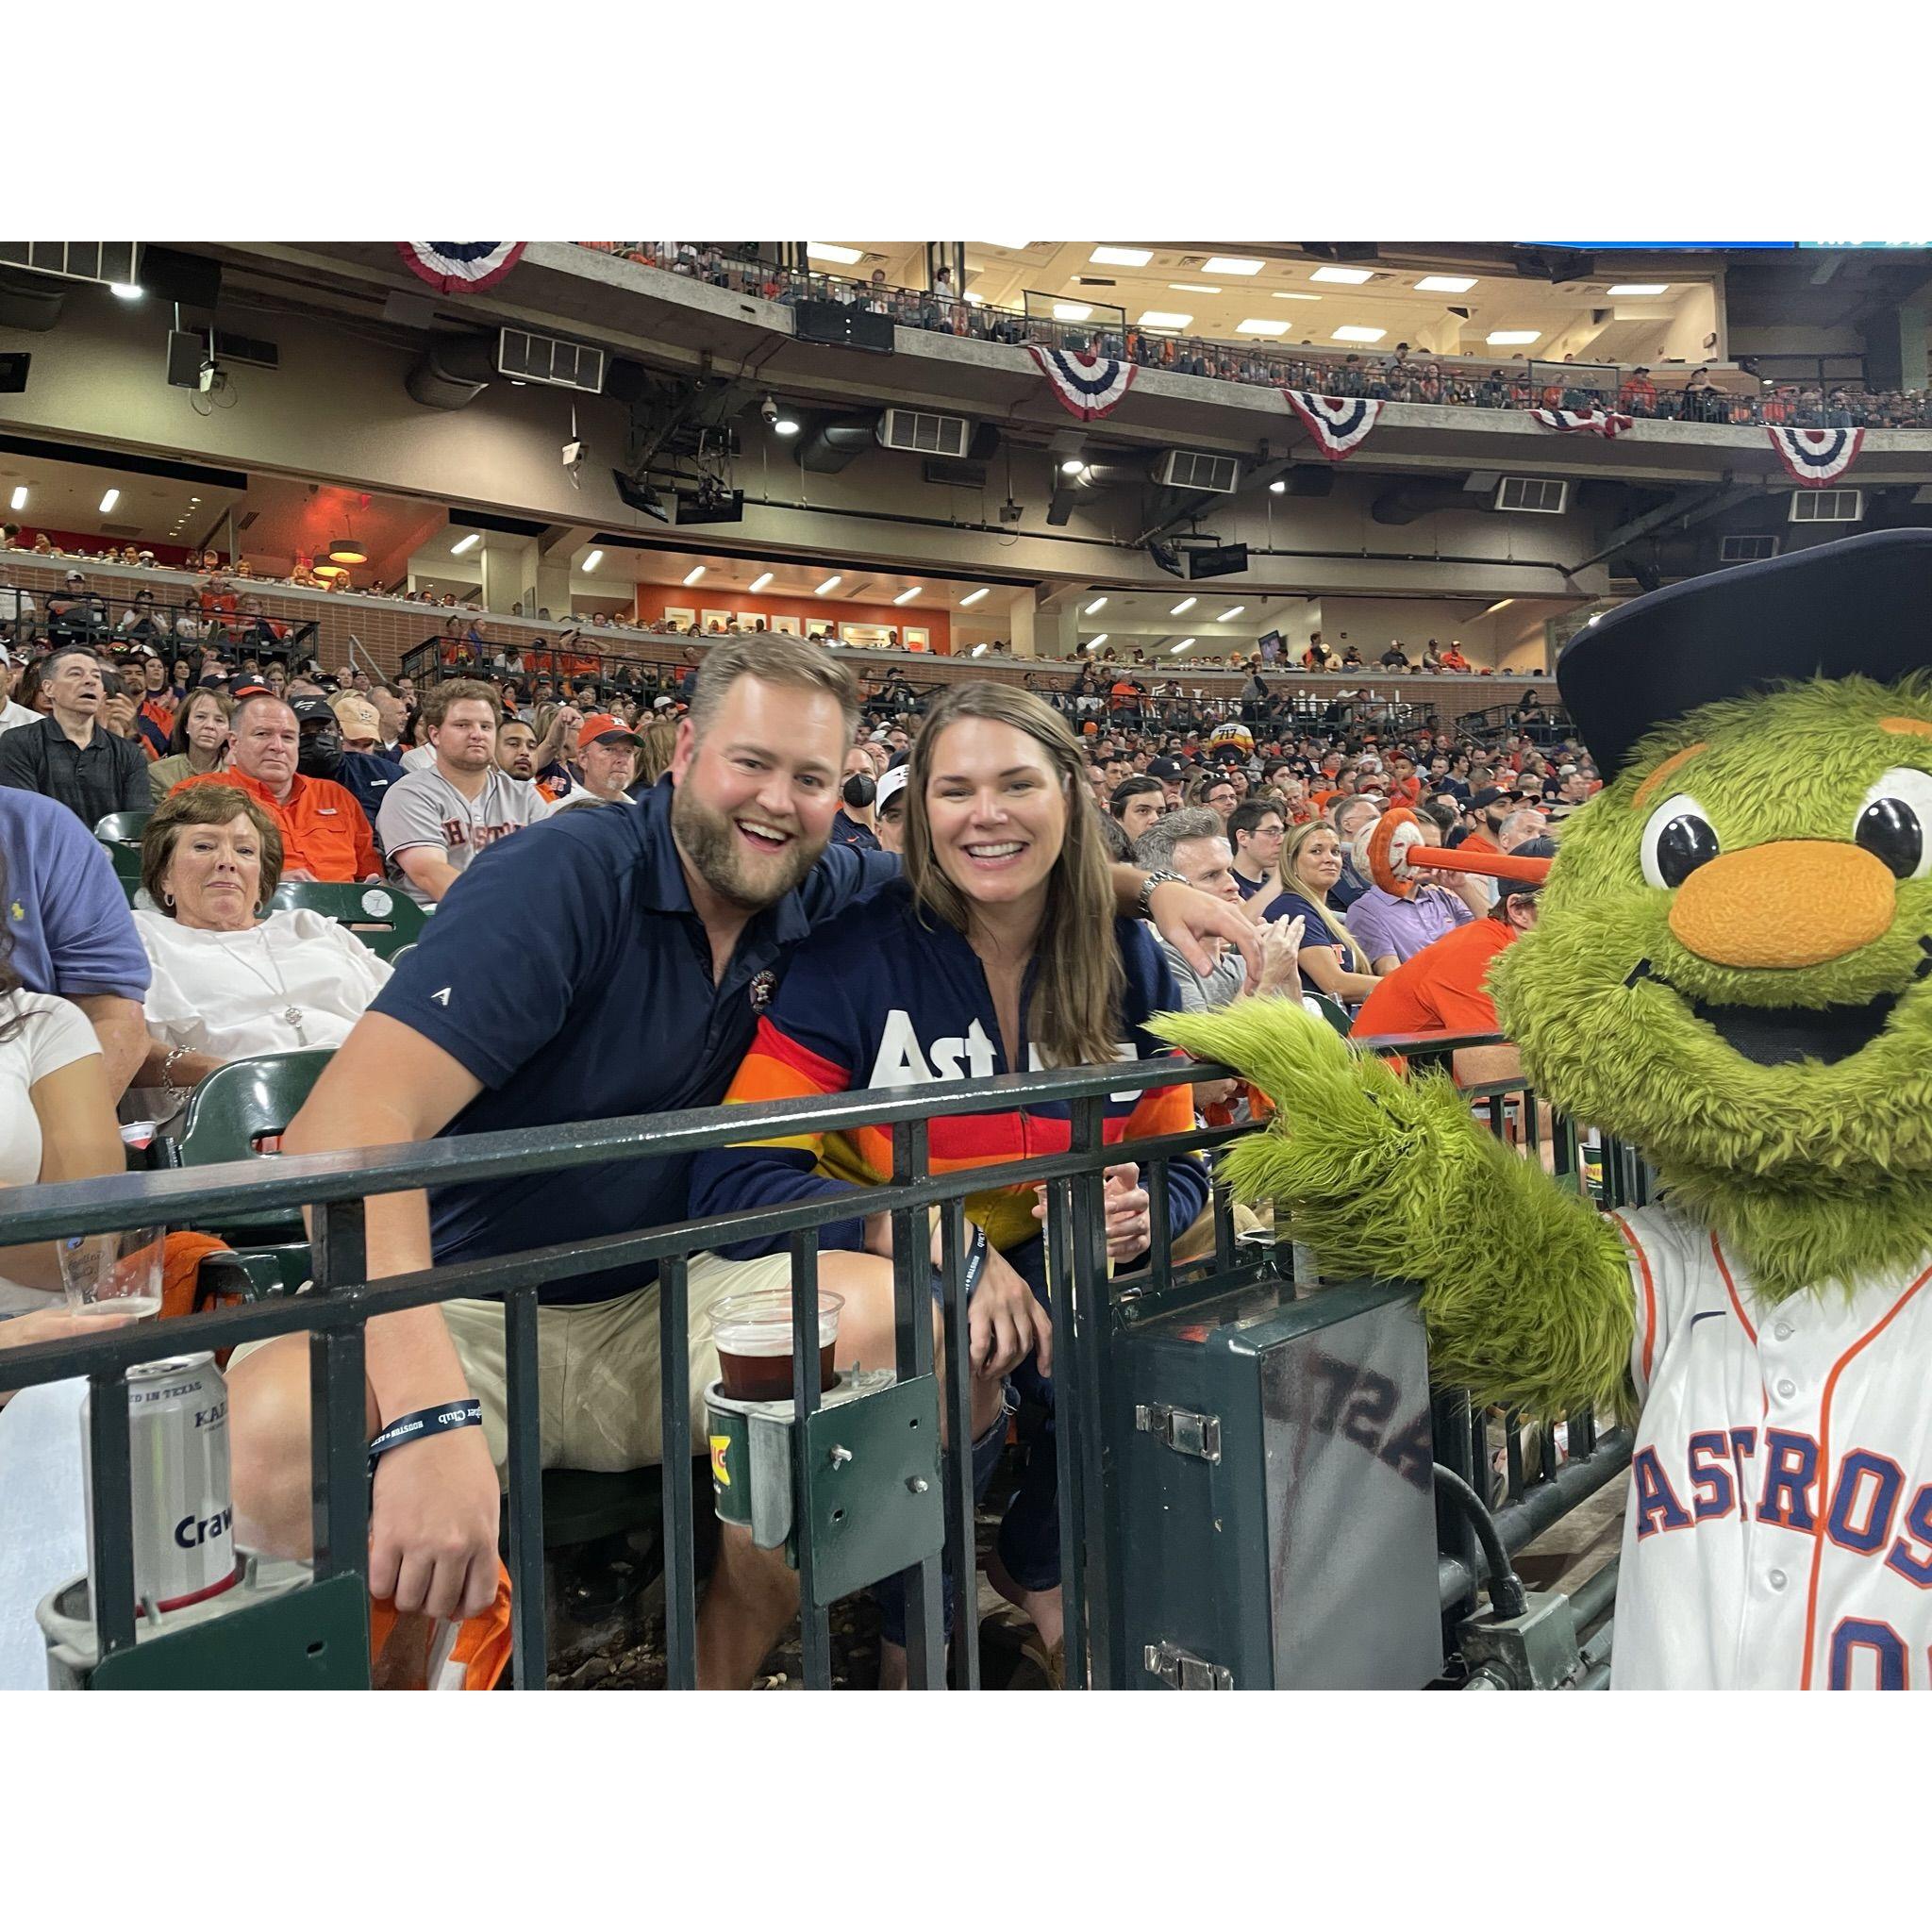 One of many Astros games, Oct 2021, Houston TX